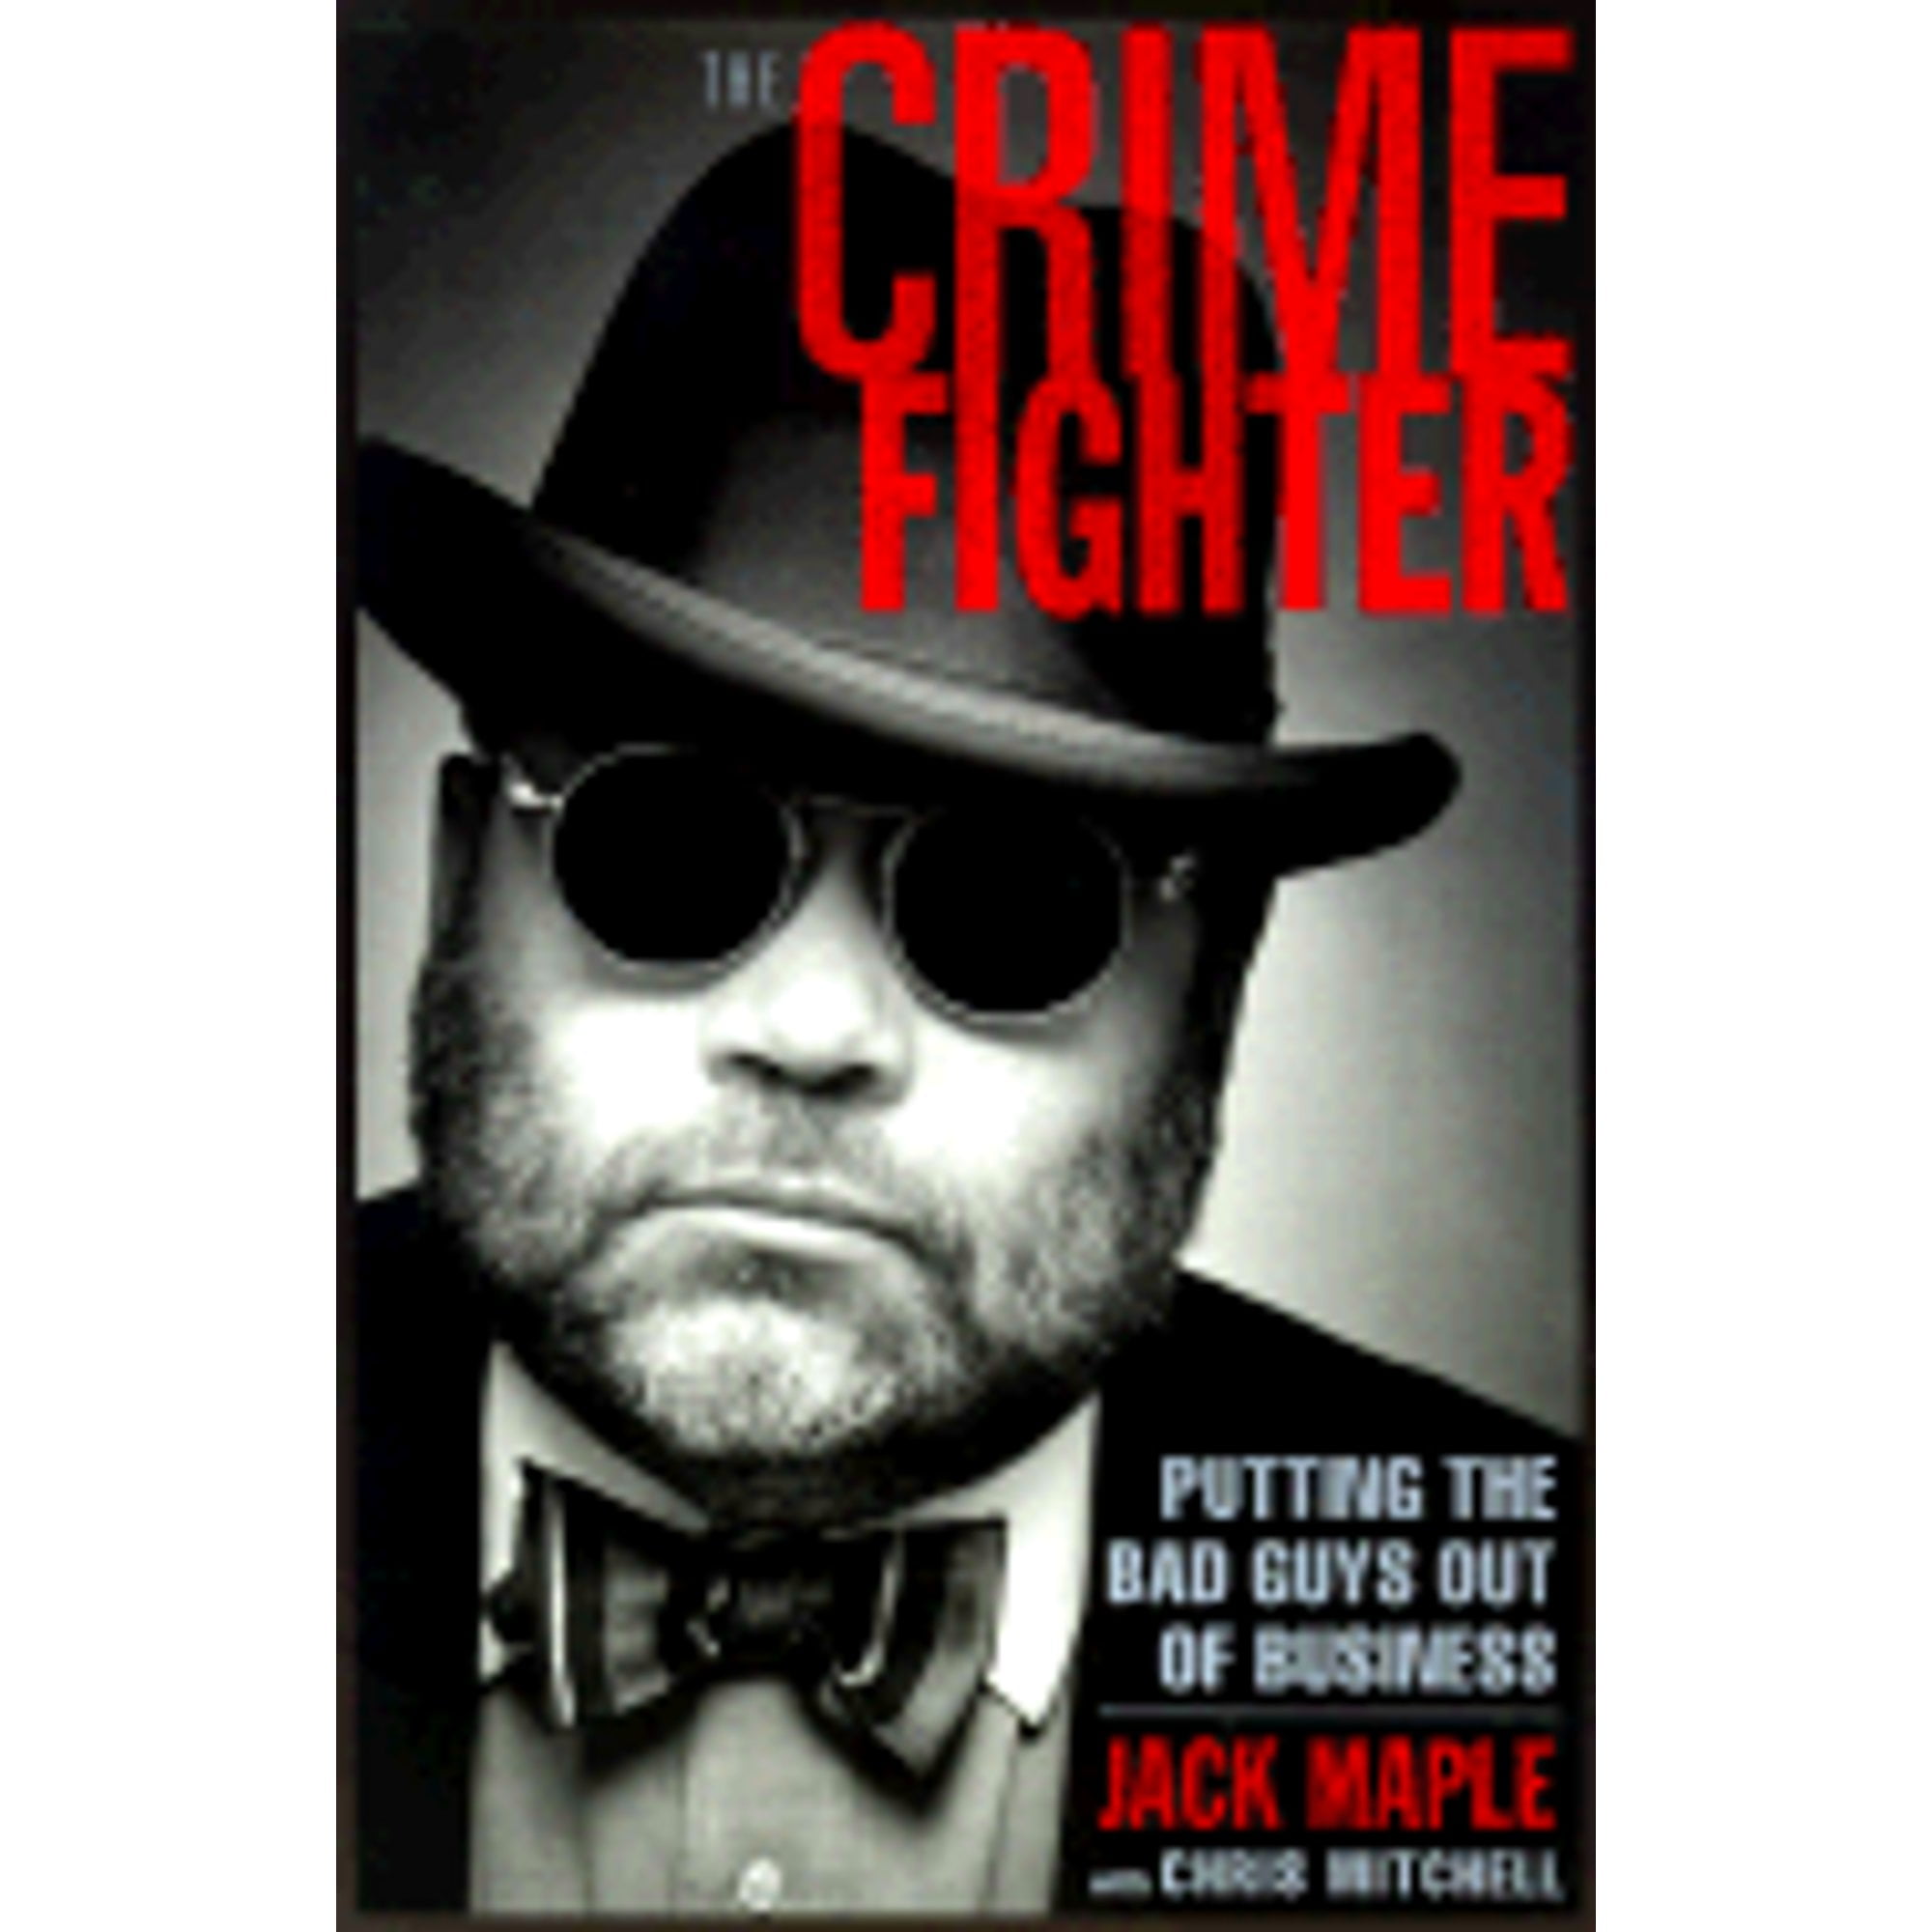 the　Business　(Hardcover)　Fighter　Bad　Putting　Out　Guys　of　The　Crime